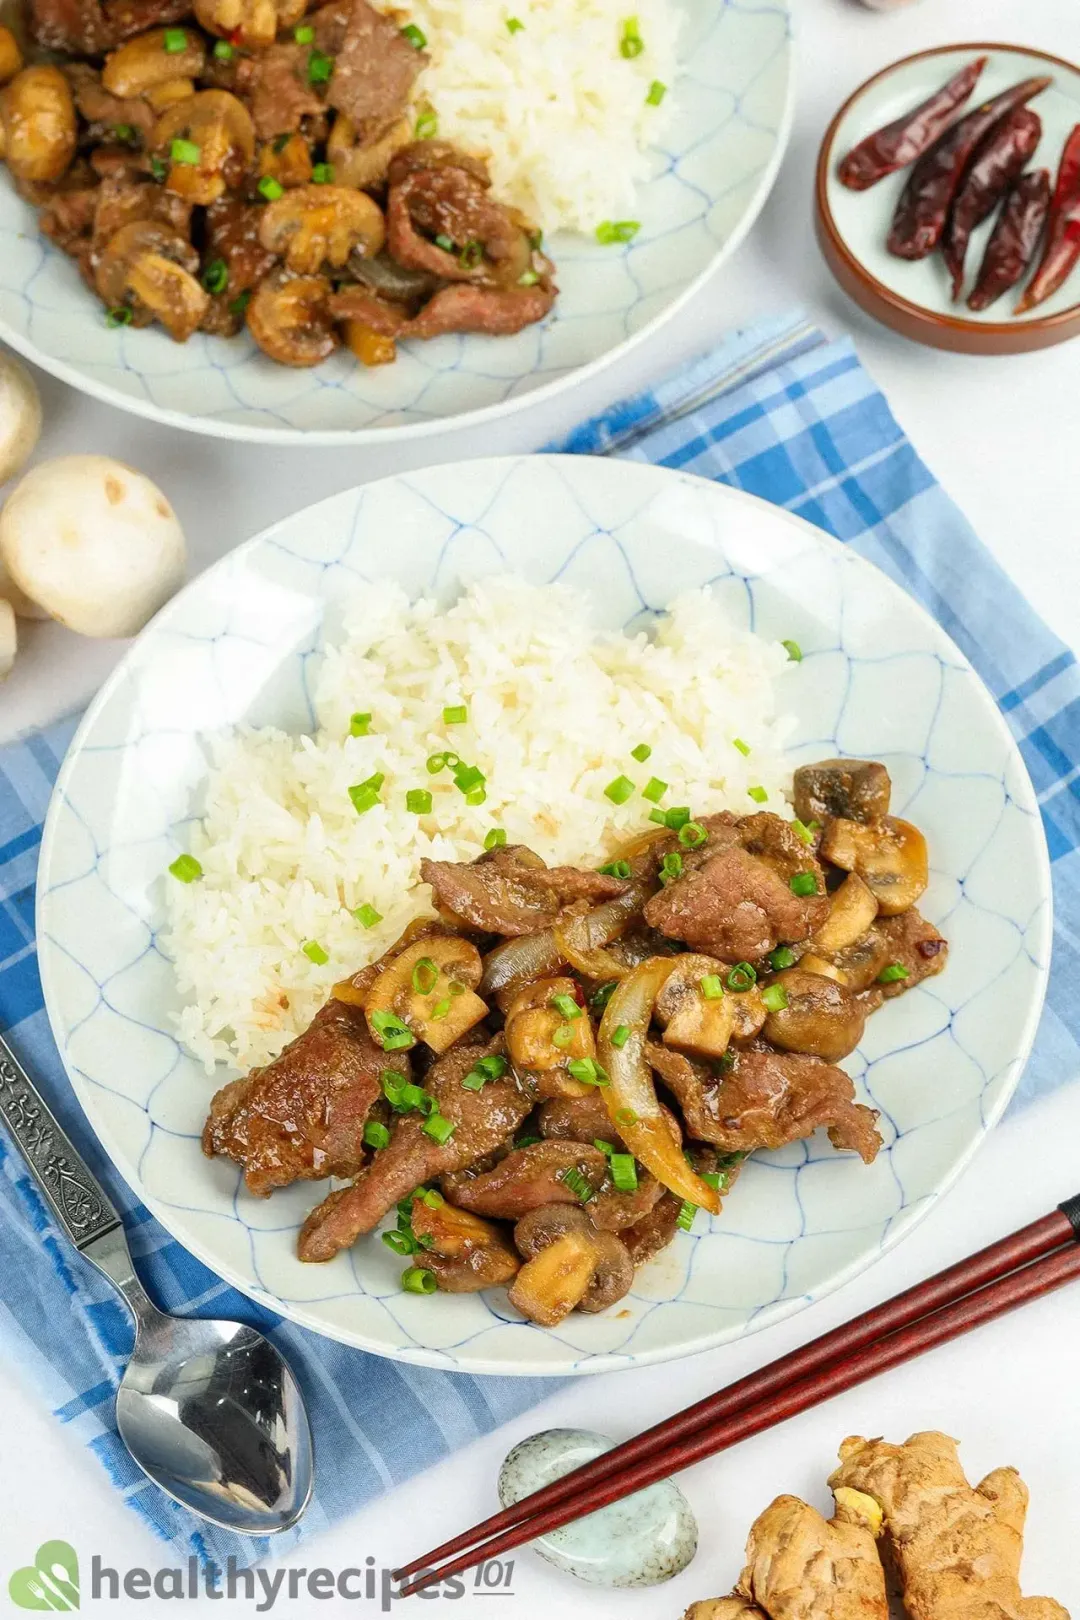 What Kind of Beef Is Best for Stir Fry